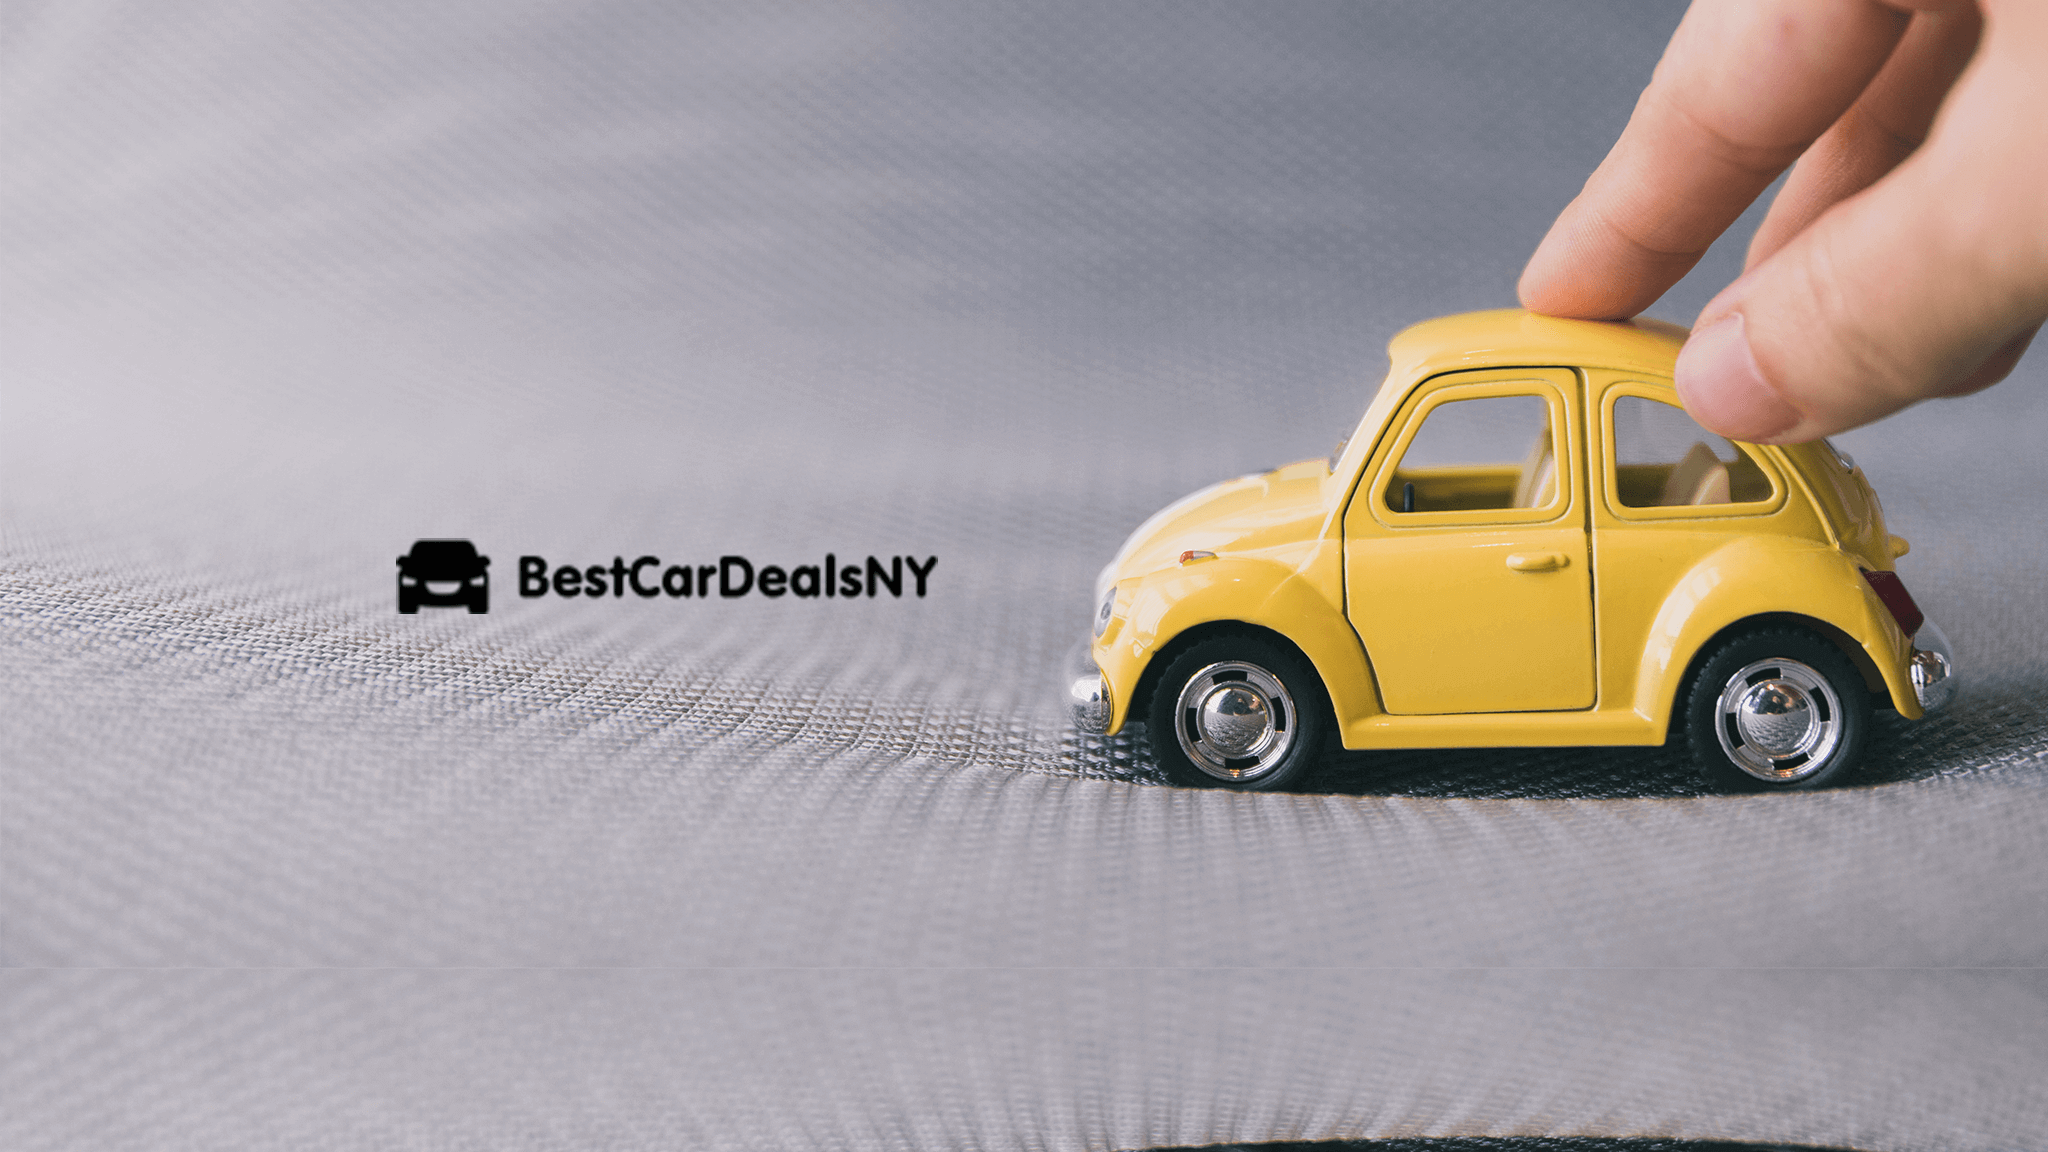 Lease a car with Best Car Deals NY